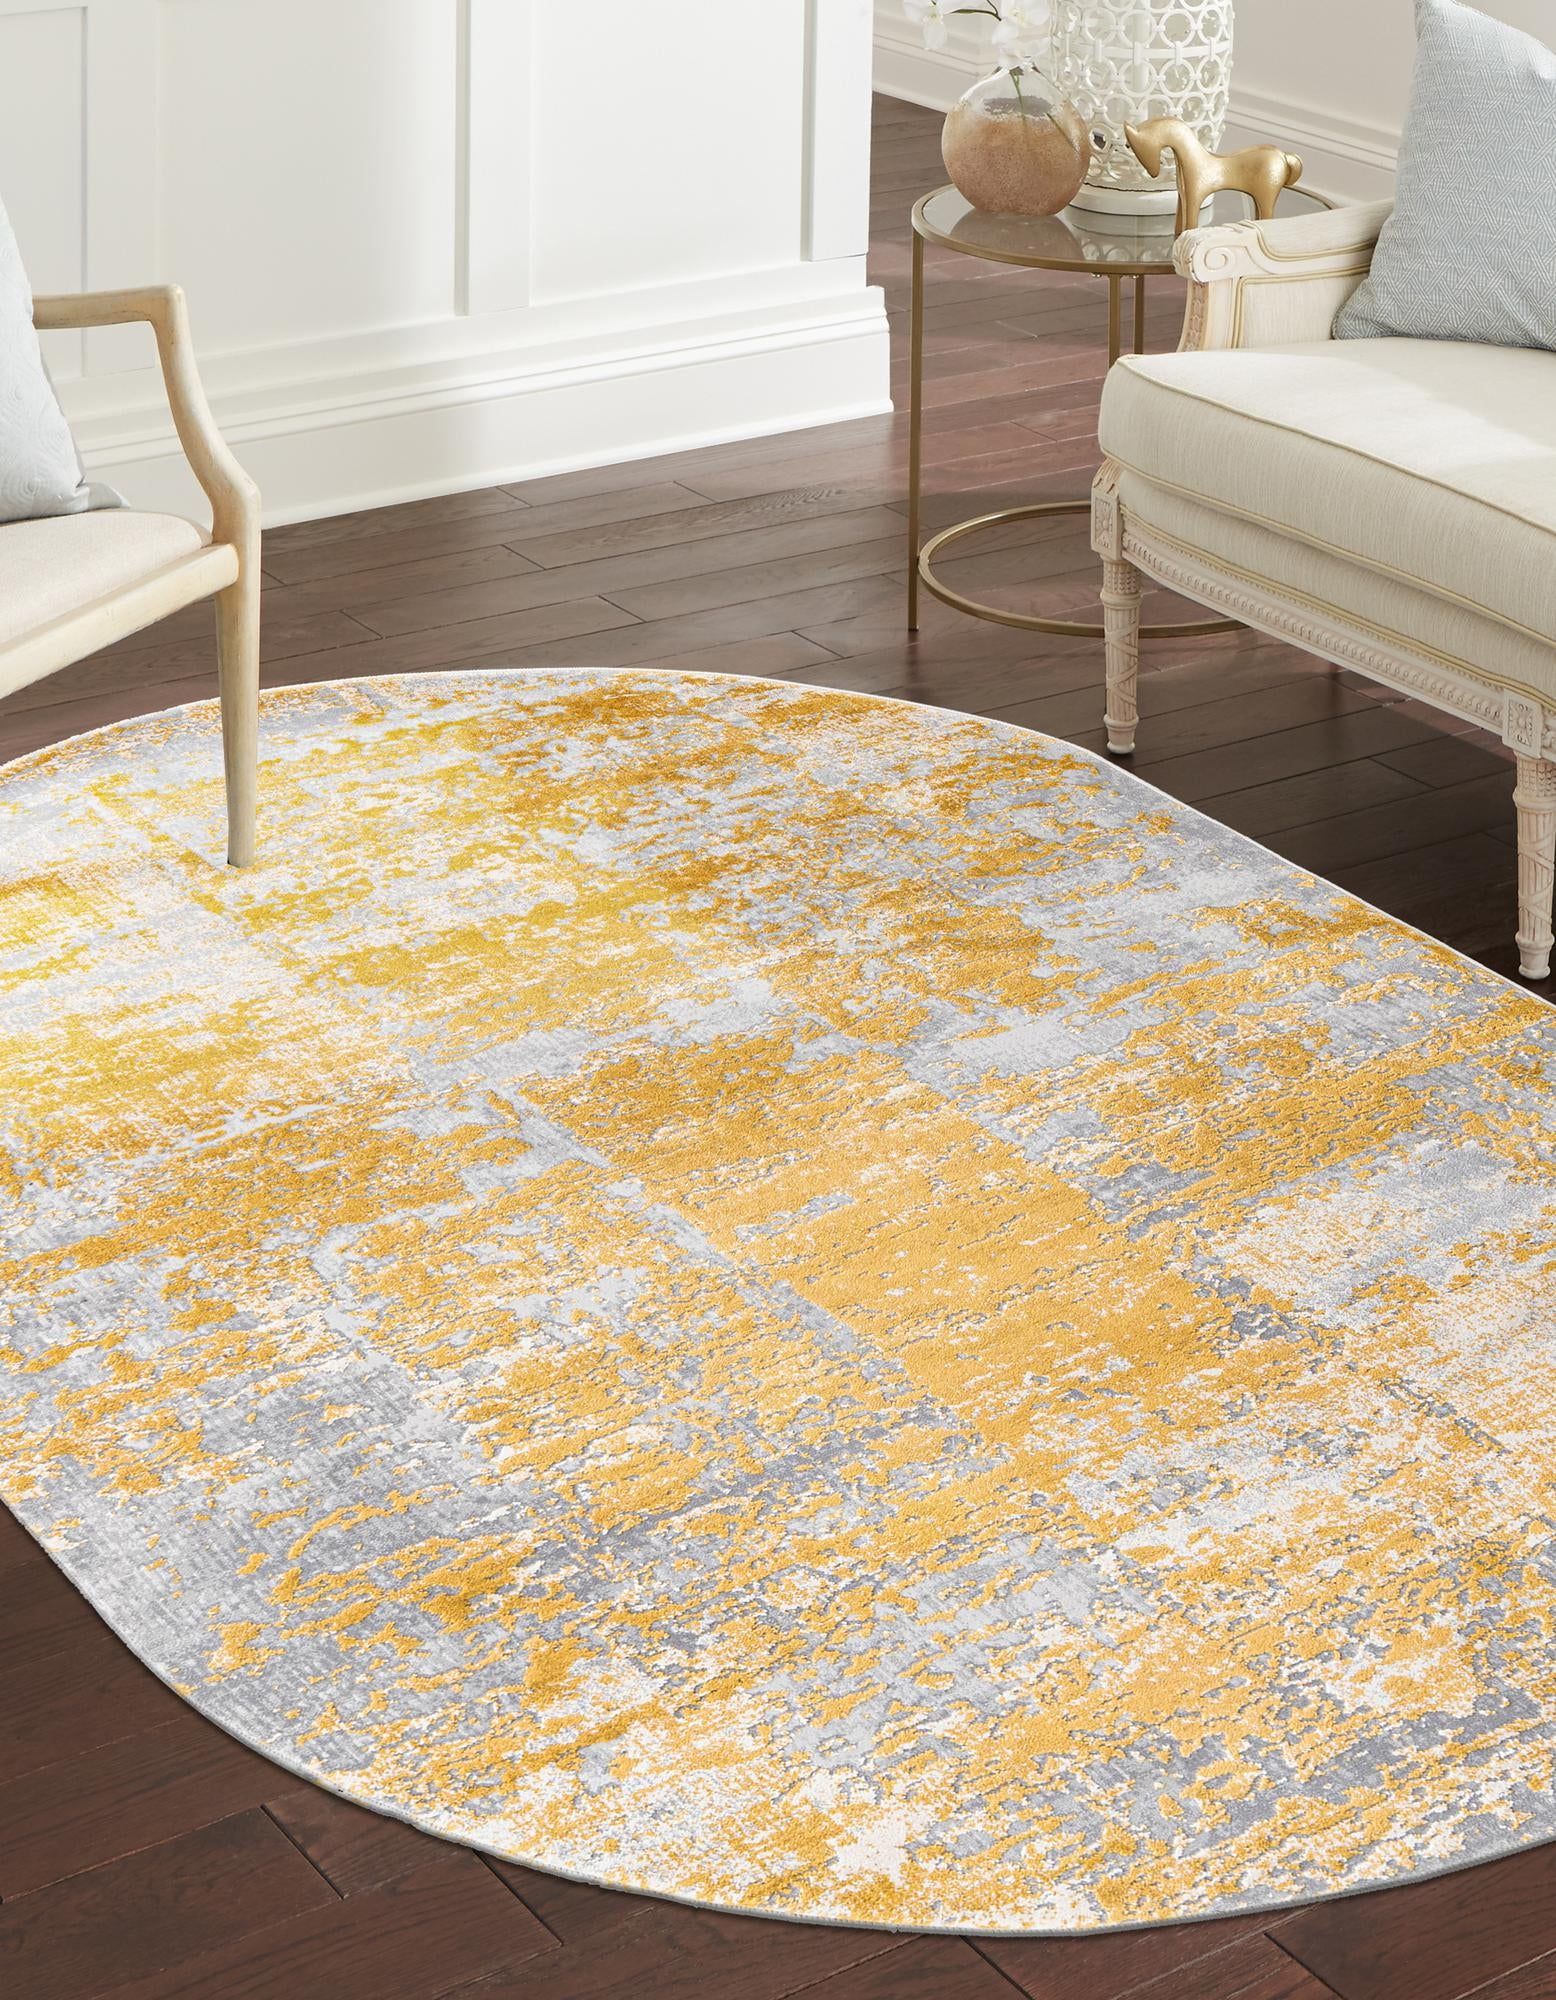 Yellow 7' 10 X 10' Finsbury Oval Rug | Outdoorrugs With Regard To Finsbury Runner Rugs (View 11 of 15)